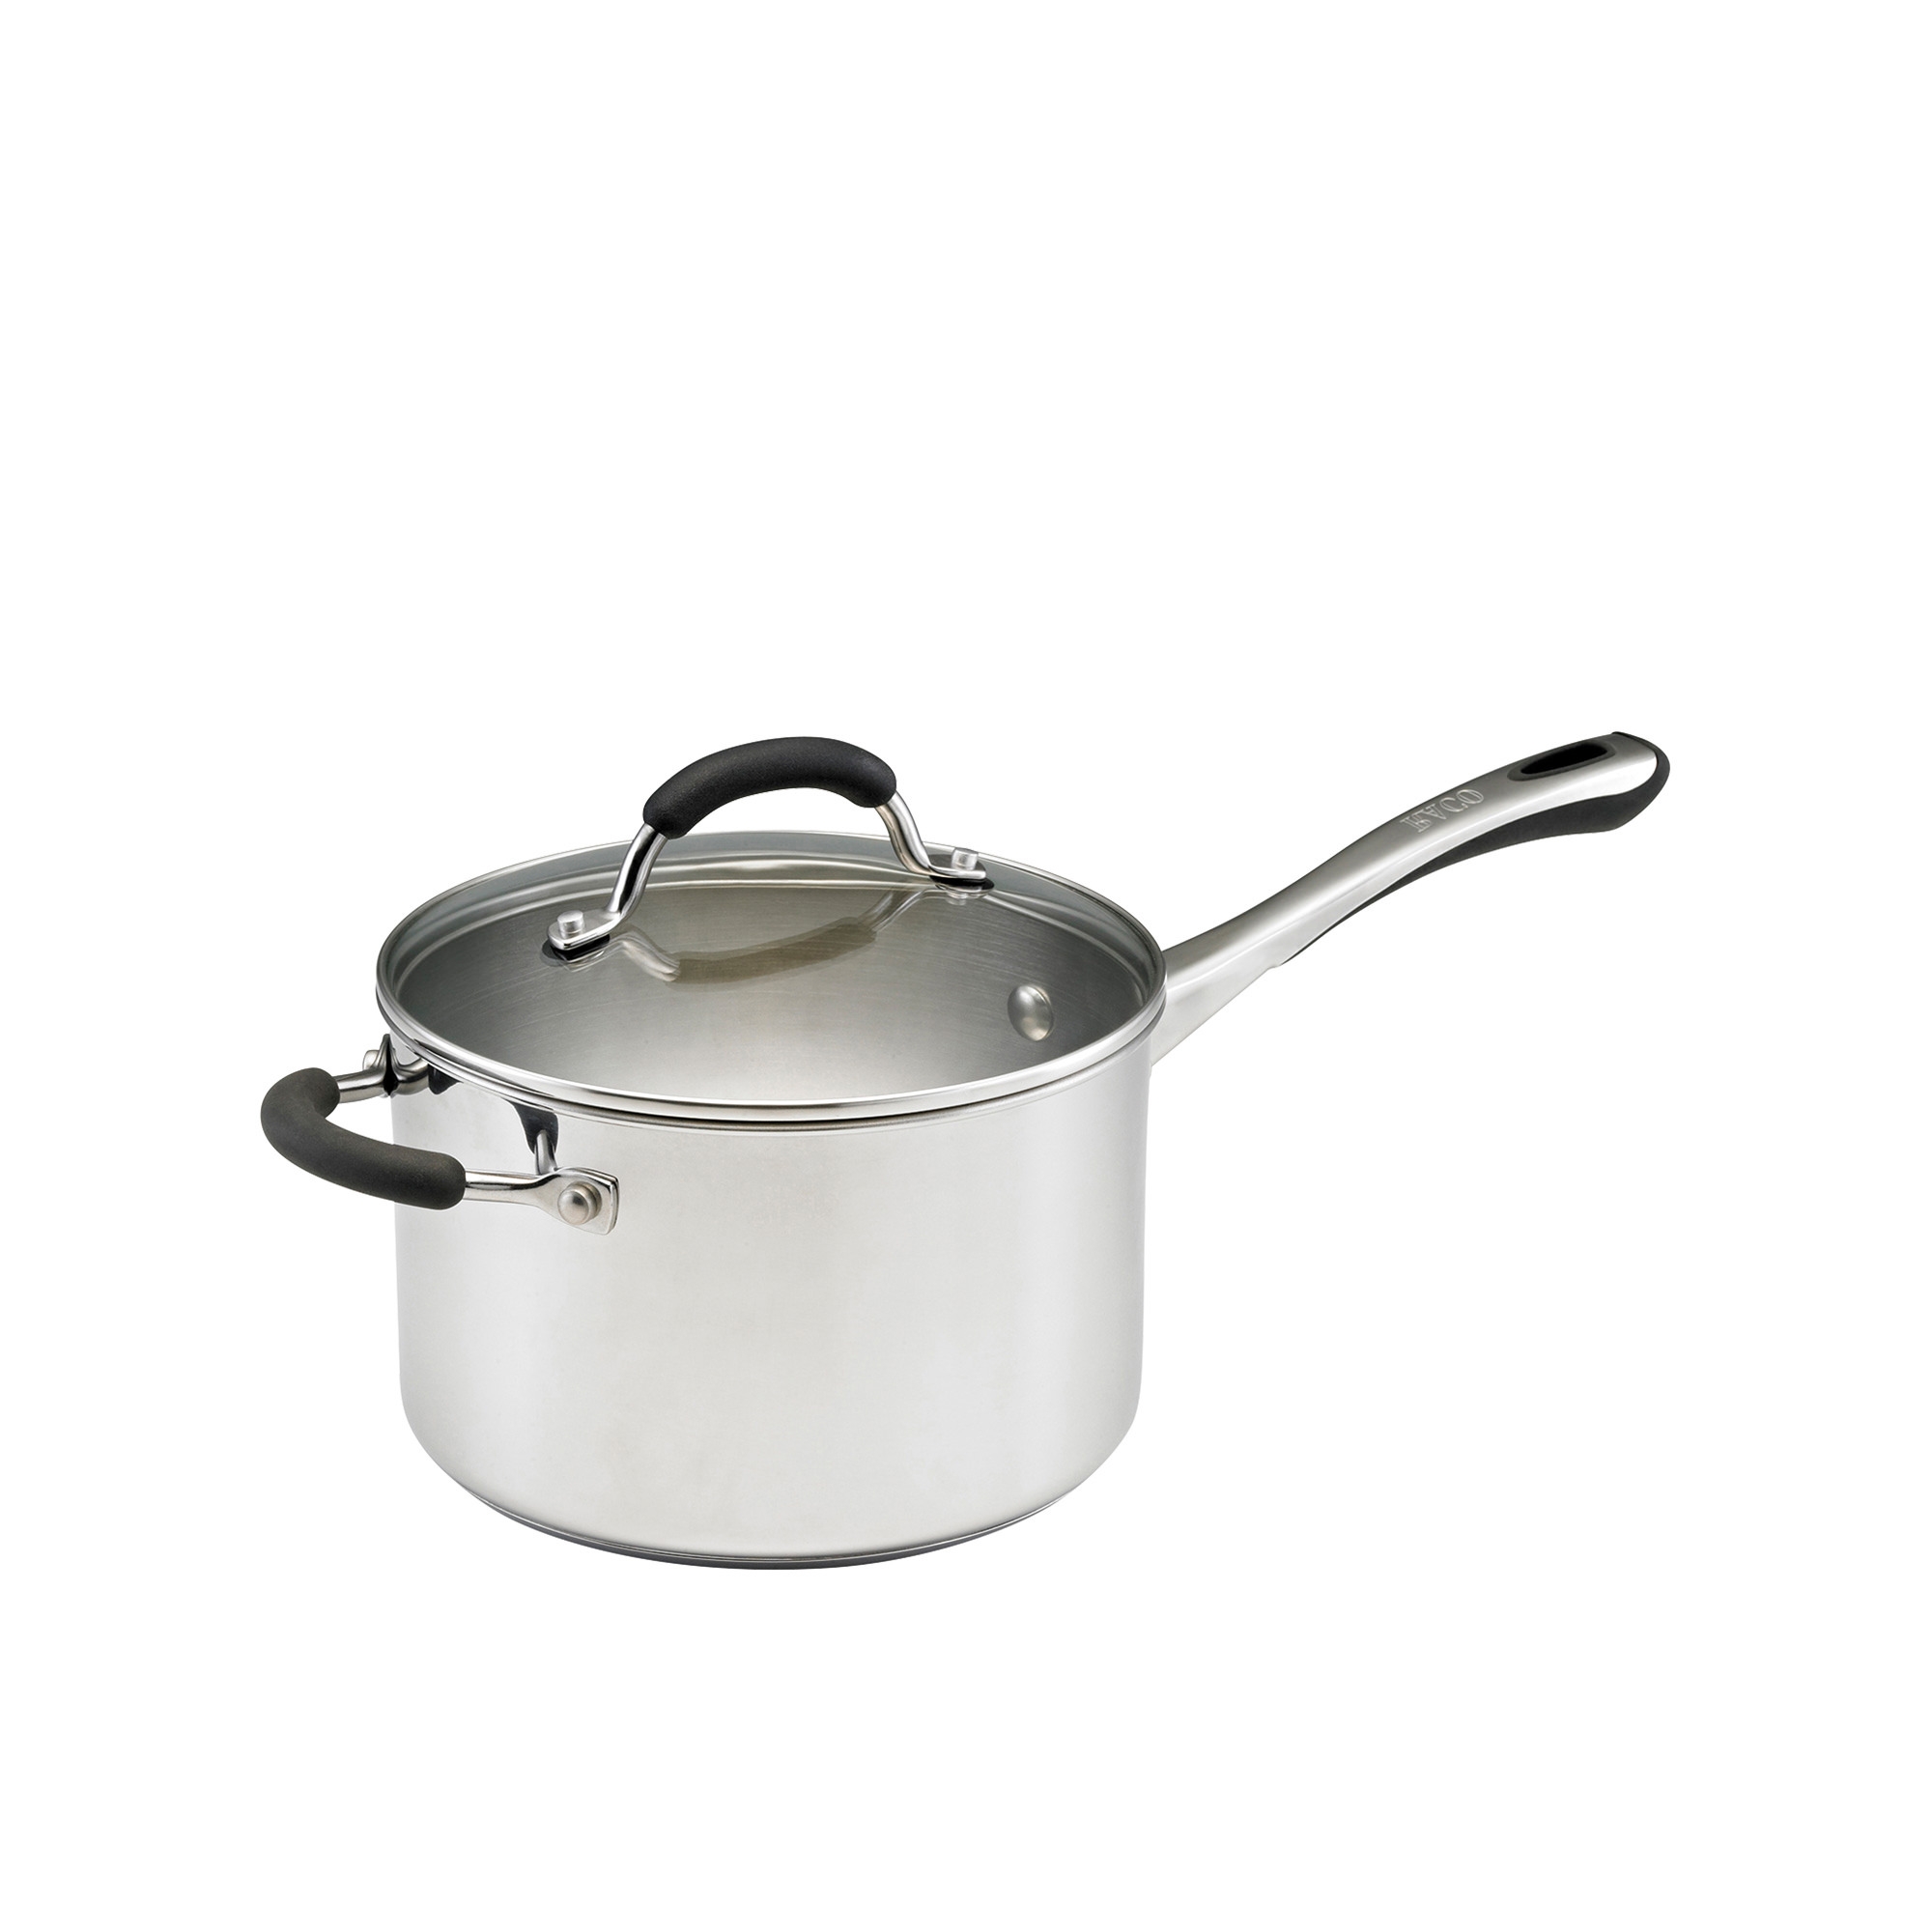 Raco Contemporary Stainless Steel Saucepan 20cm - 3.8L Image 1